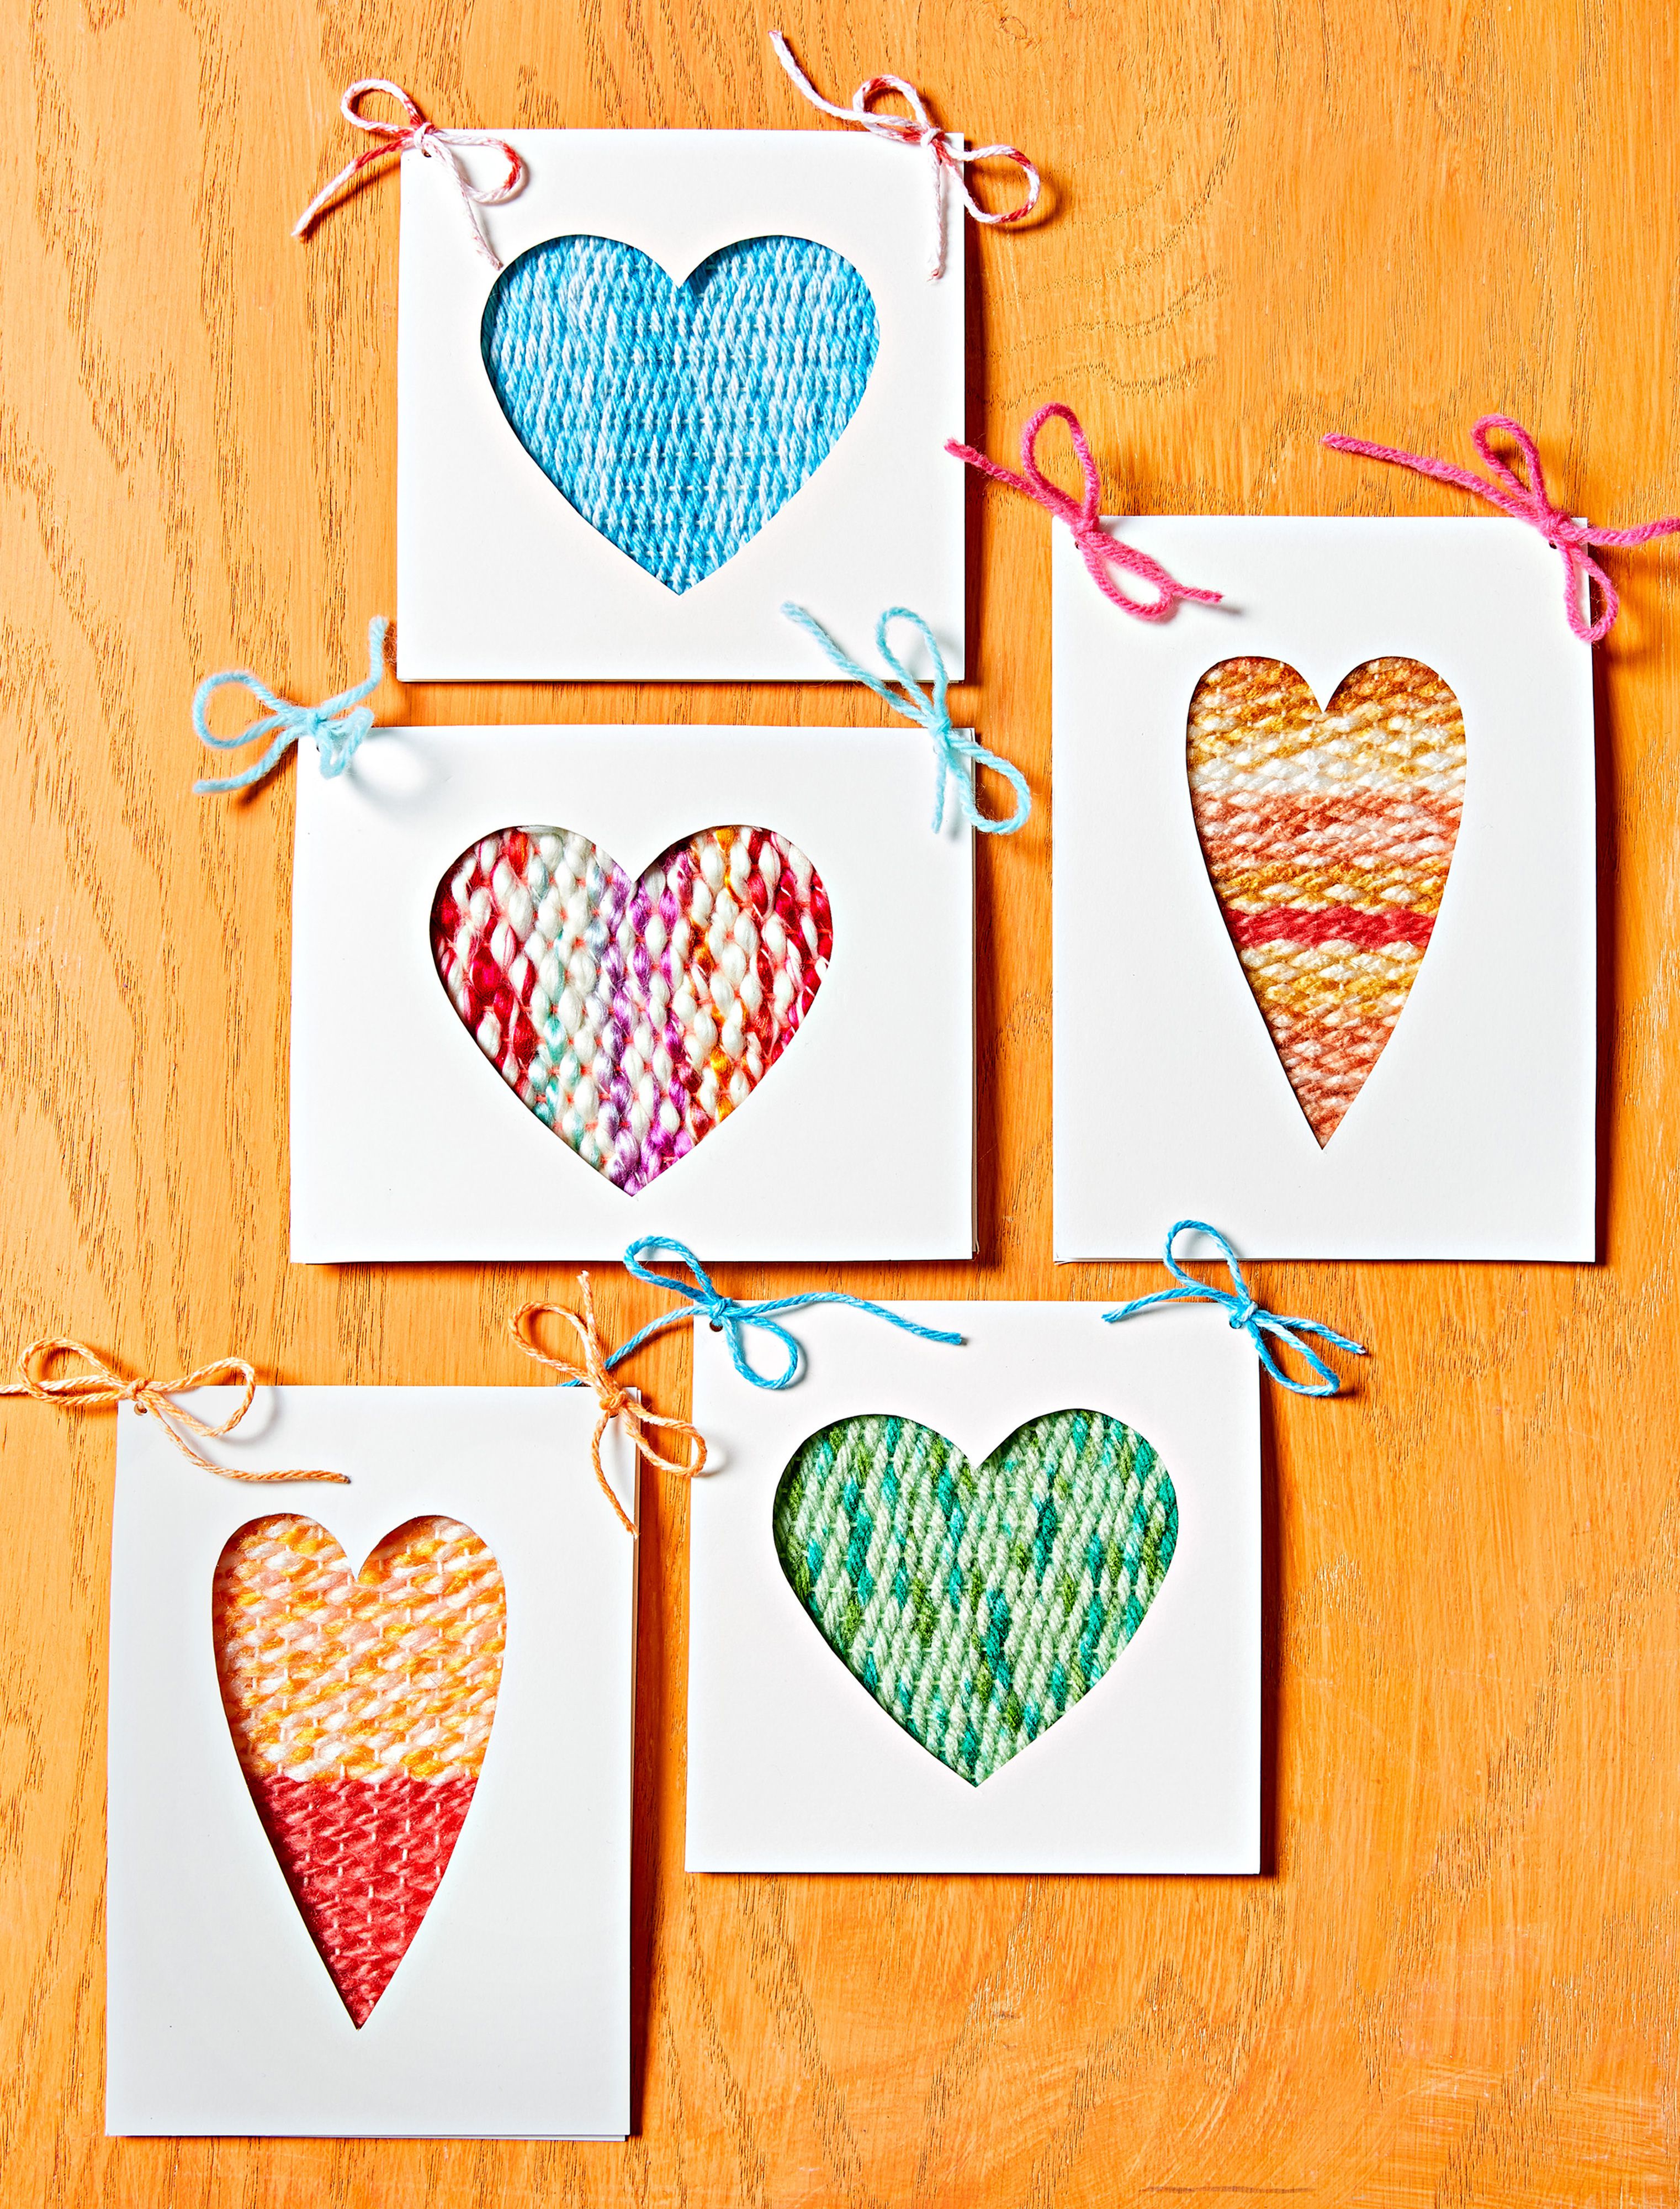 Homemade valentine cards that make it easy to spread the love